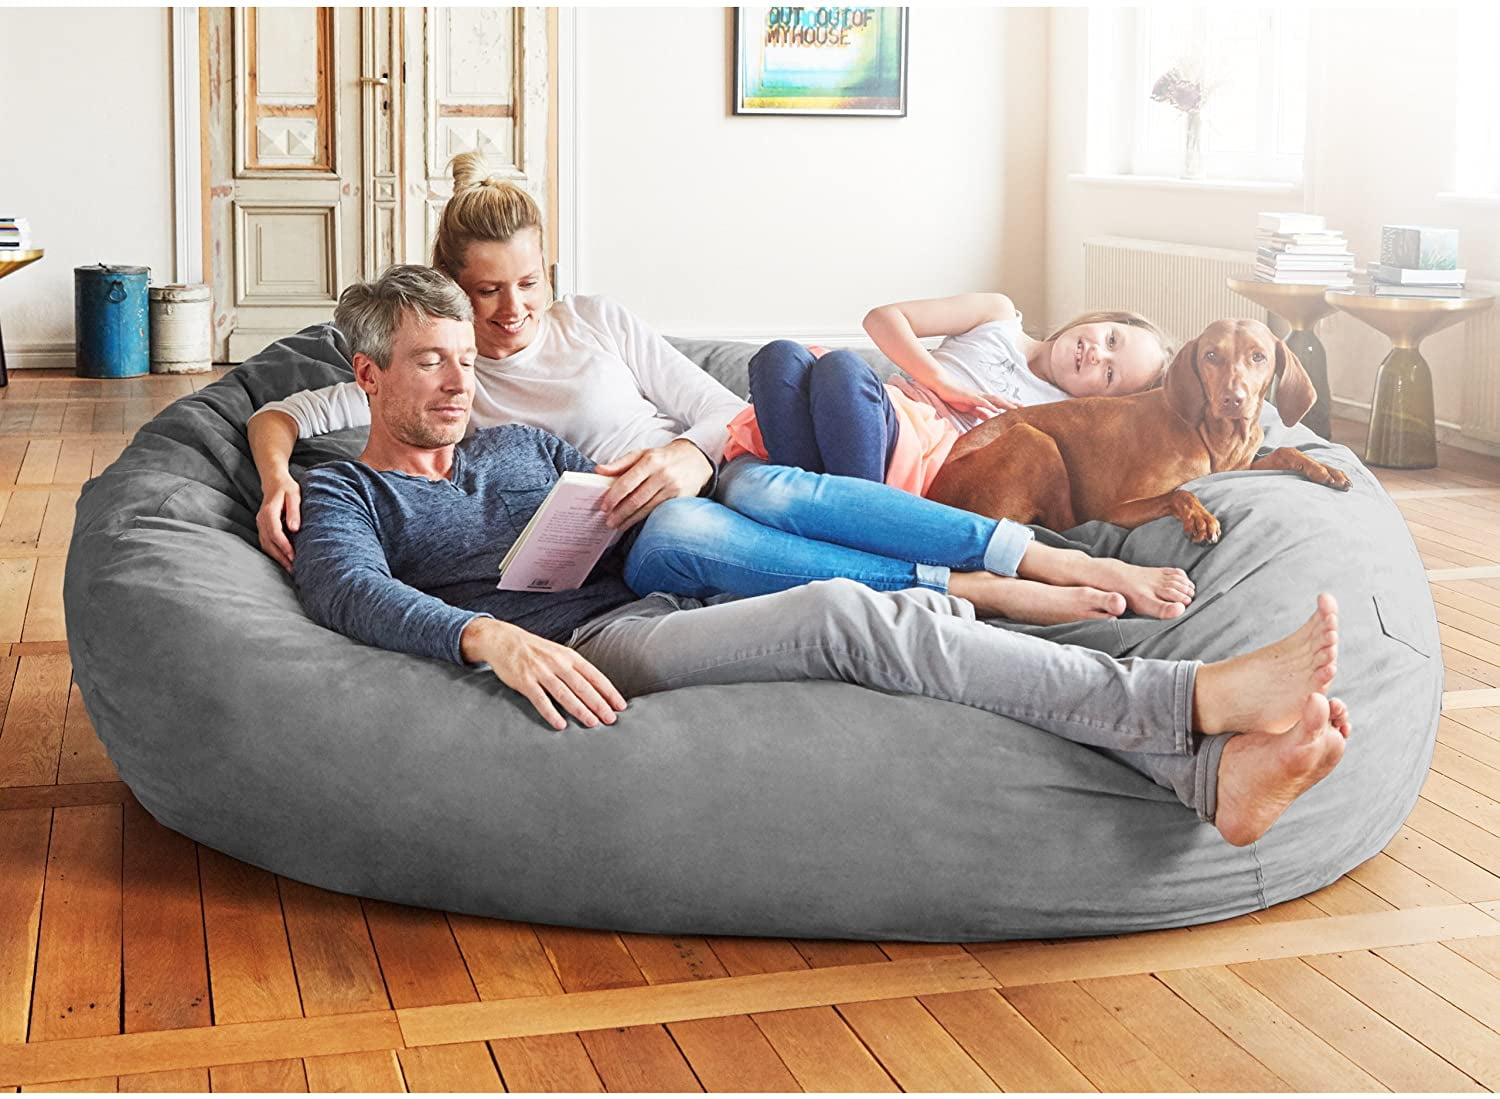 Lumaland Luxurious Giant 5ft Bean Bag Chair with Microsuede Cover - Ultra  Soft, Foam Filling, Washab…See more Lumaland Luxurious Giant 5ft Bean Bag